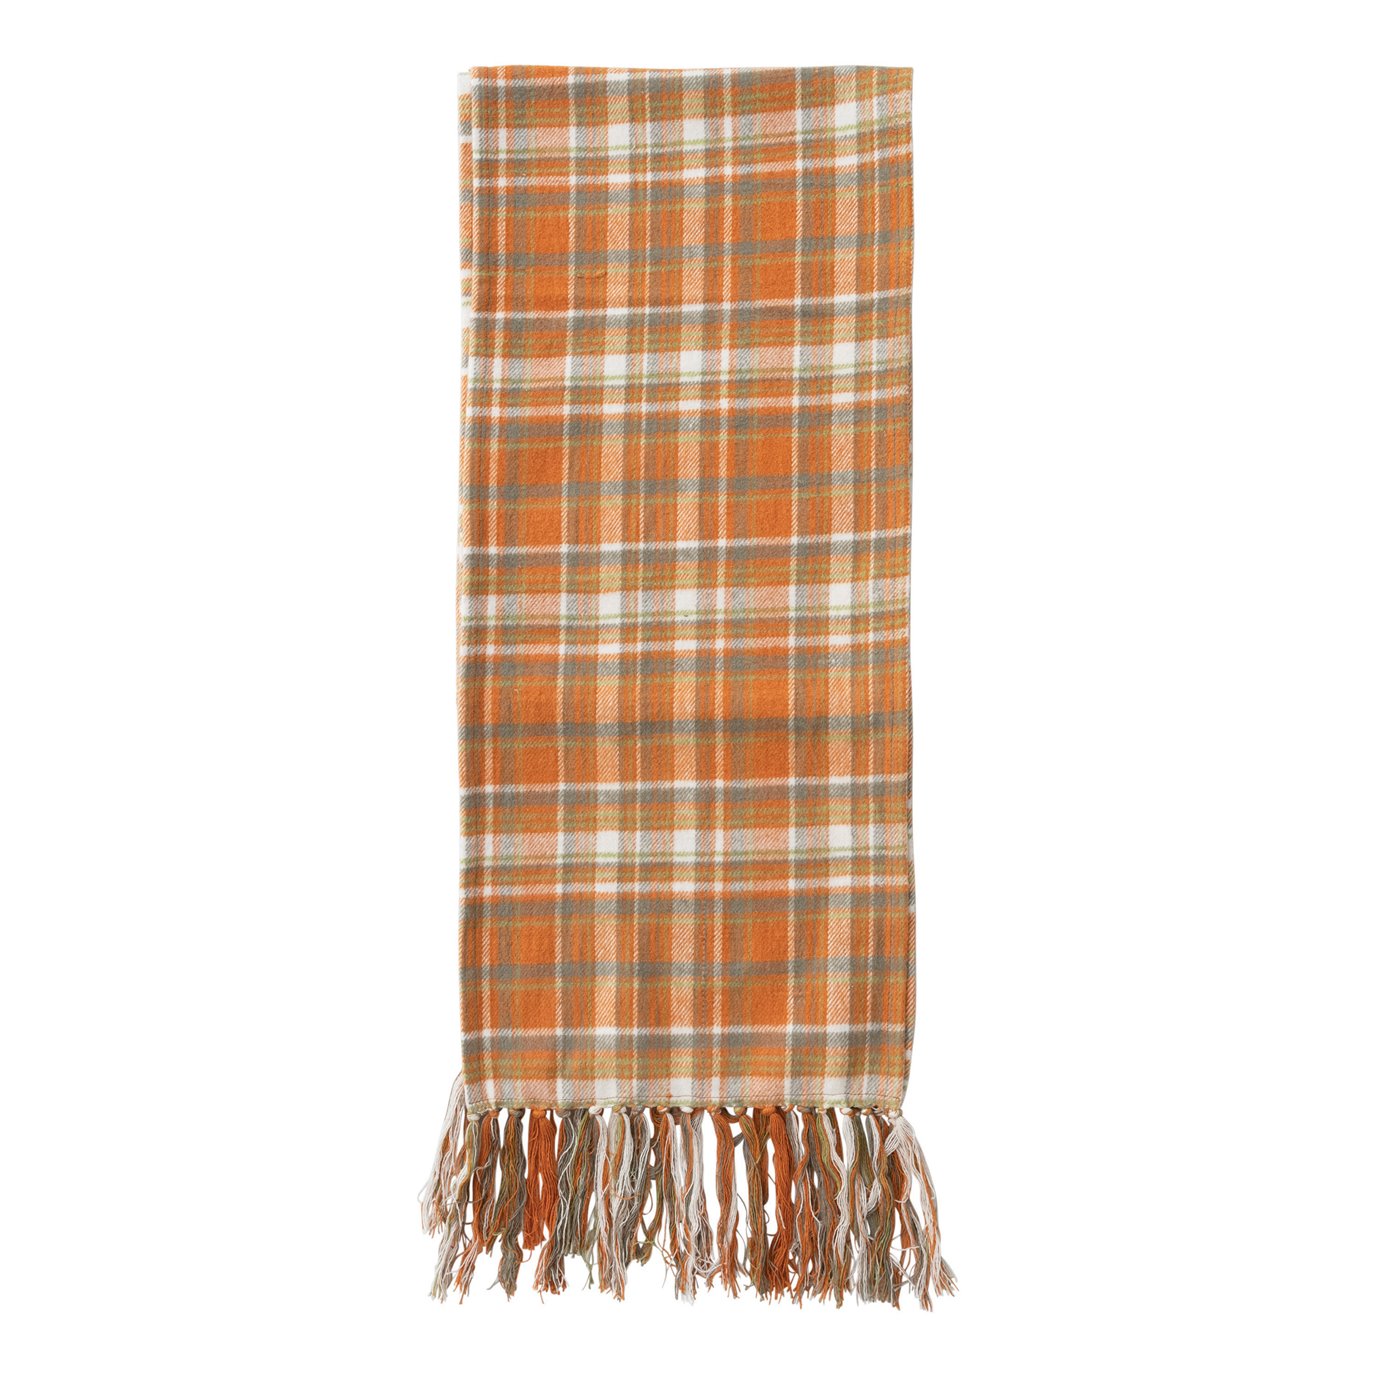 Autumn Plaid Cotton Flannel Table Runner with Fringe 72"L x 14"W